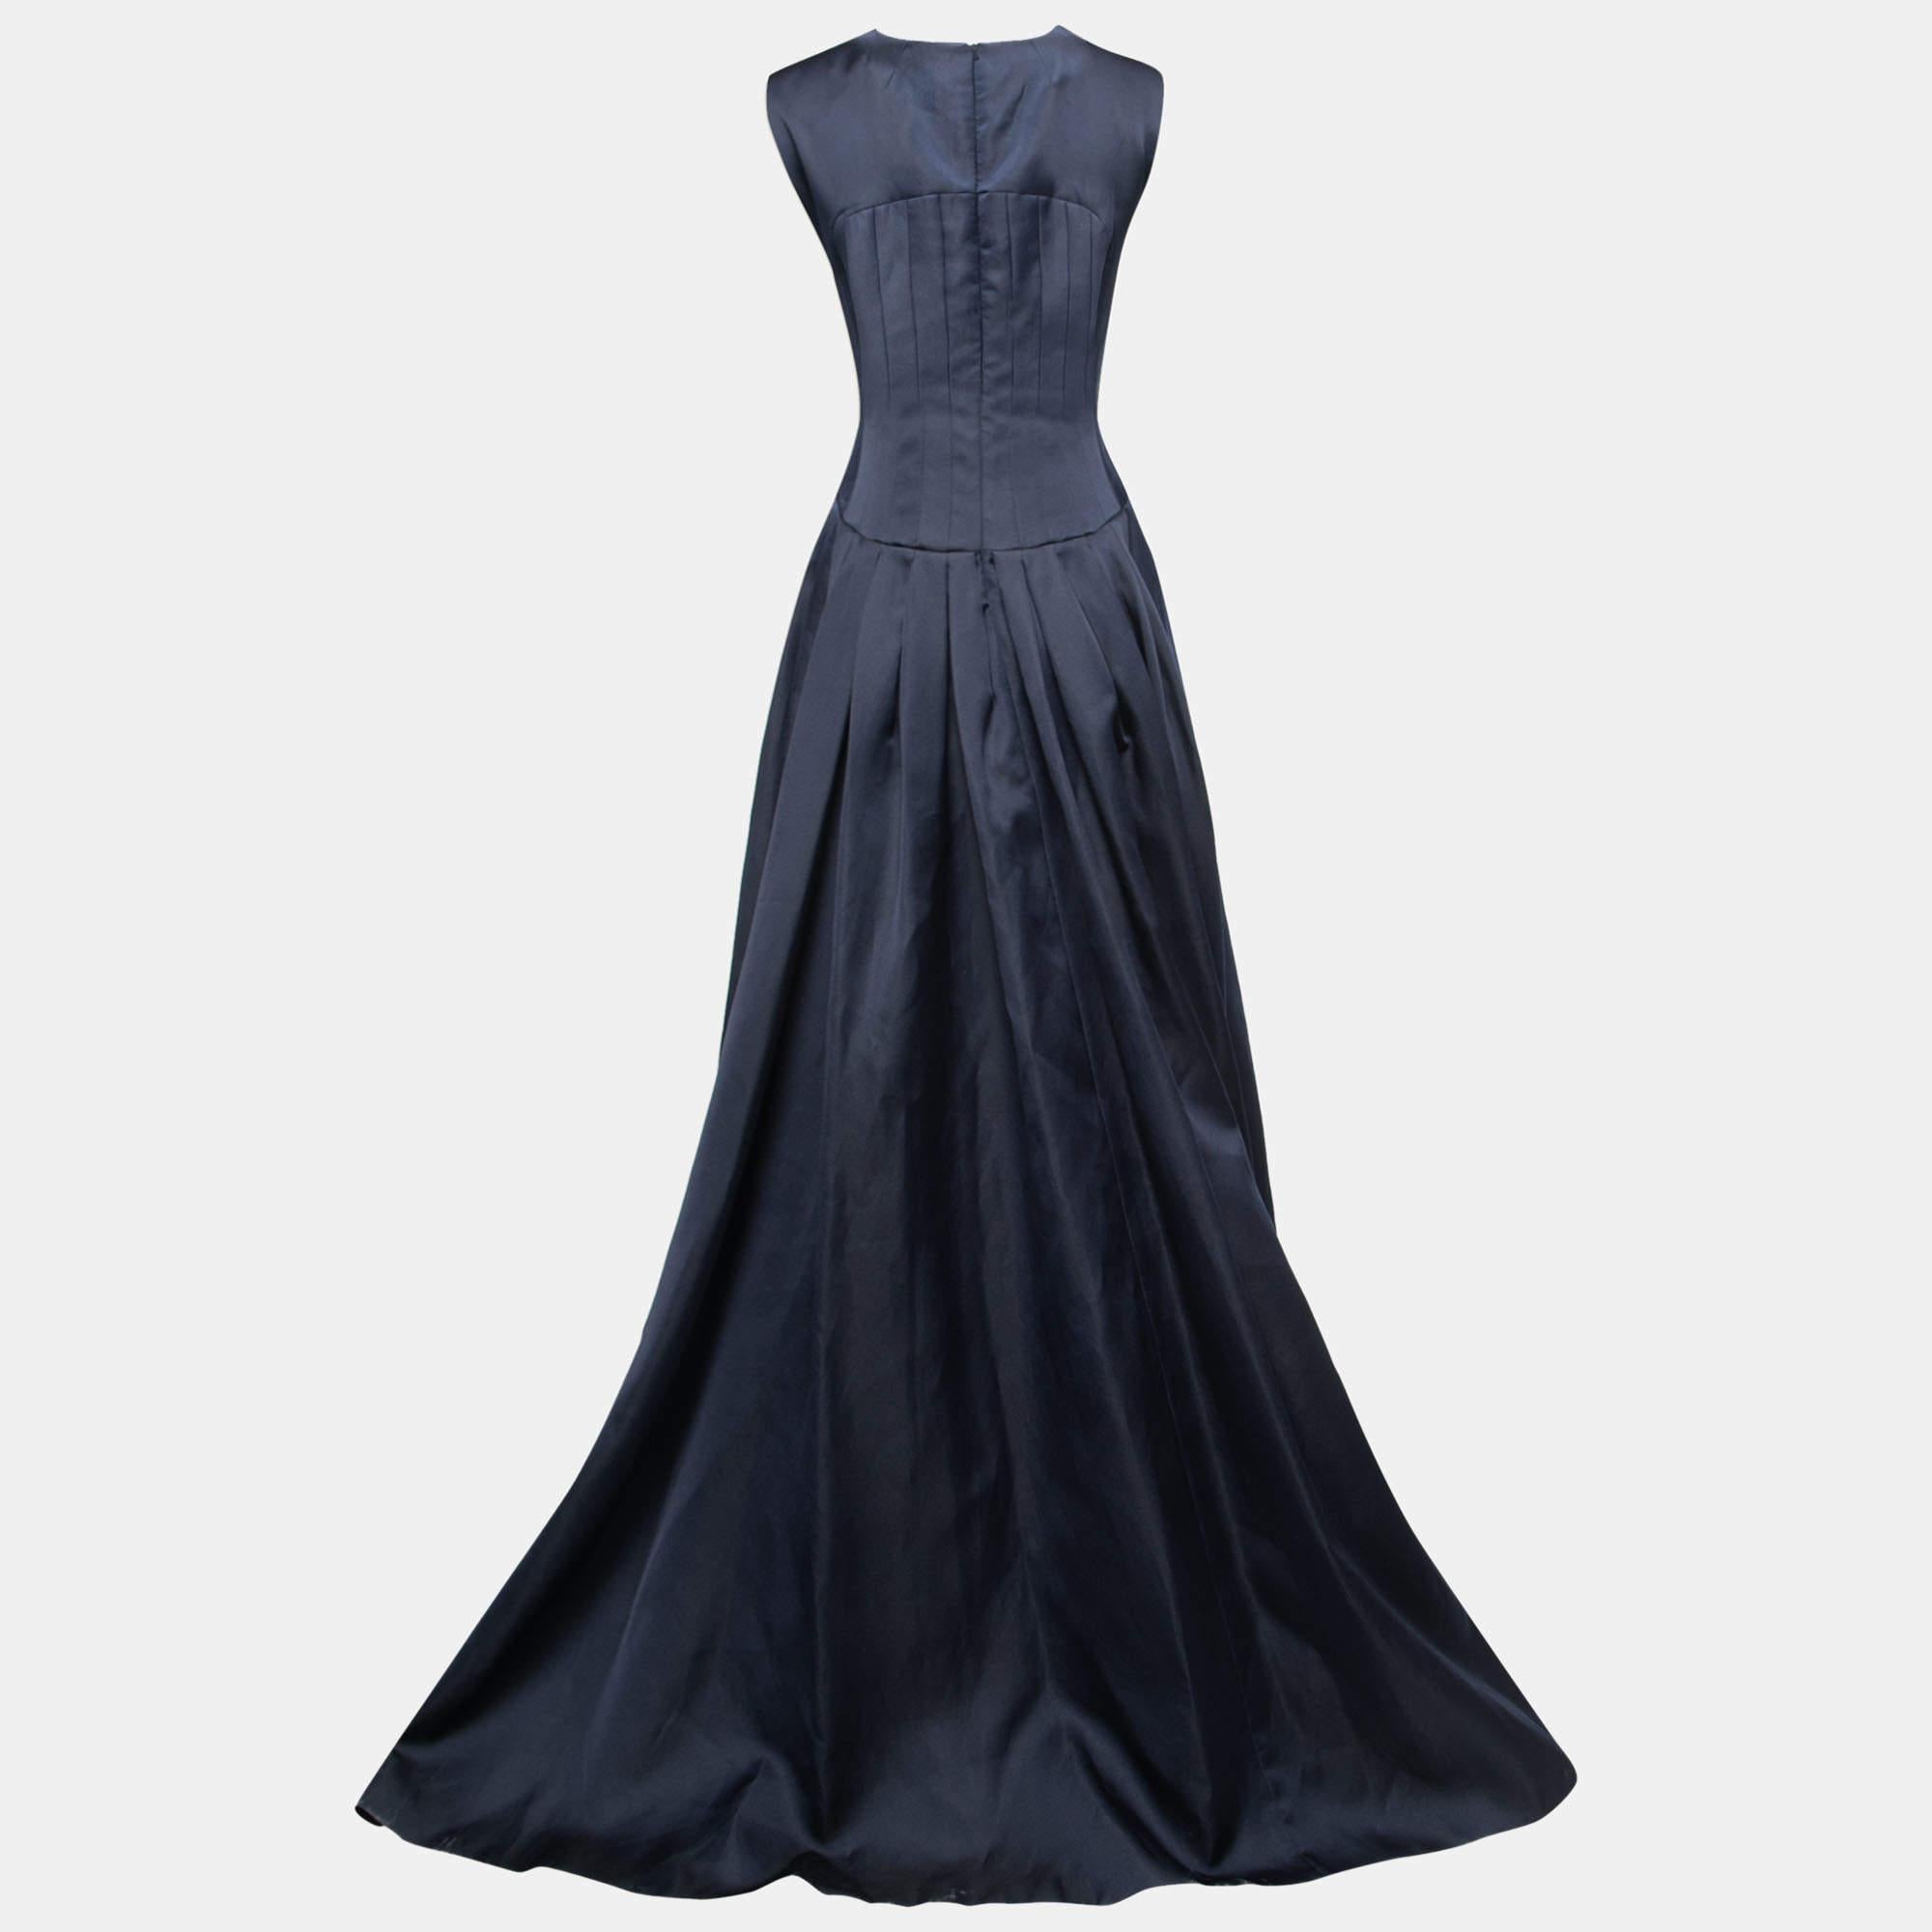 Make a luxe fashion statement by wearing this designer gown. It is tailored using fine fabric into a flattering silhouette.

